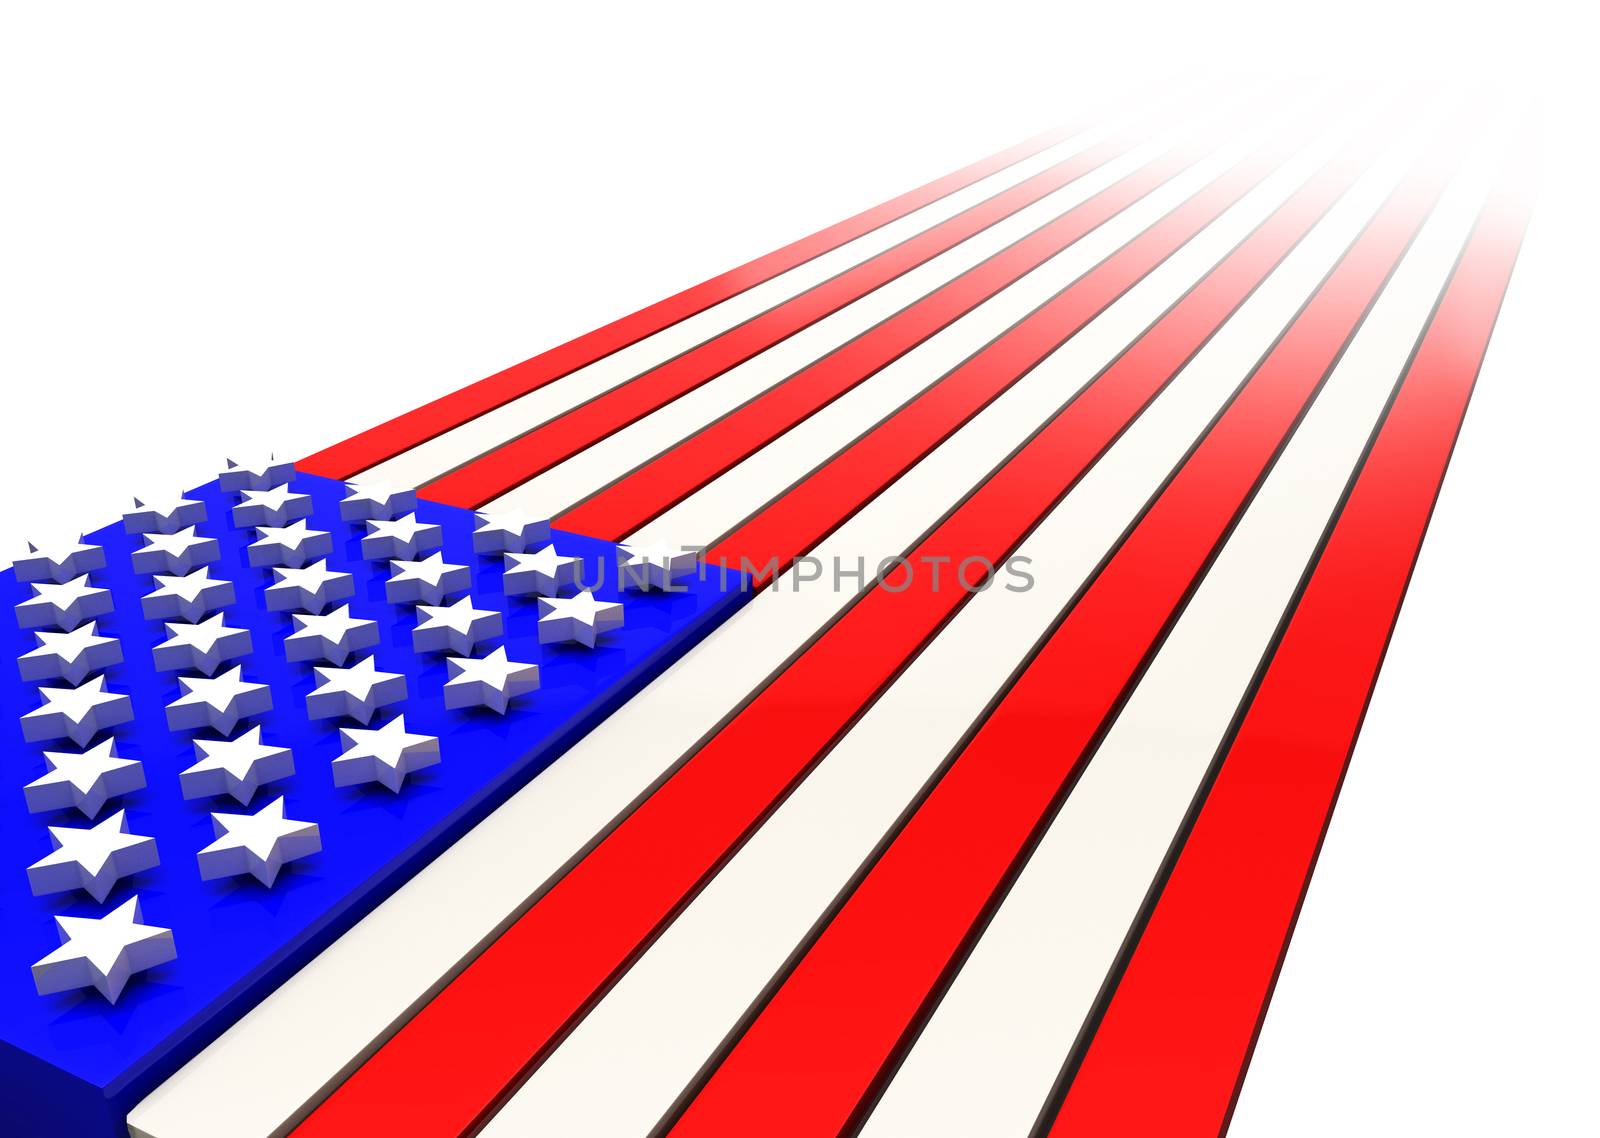 3D Rendering of American Flag in Strong Perspective Disappearing diagonally in the Distance